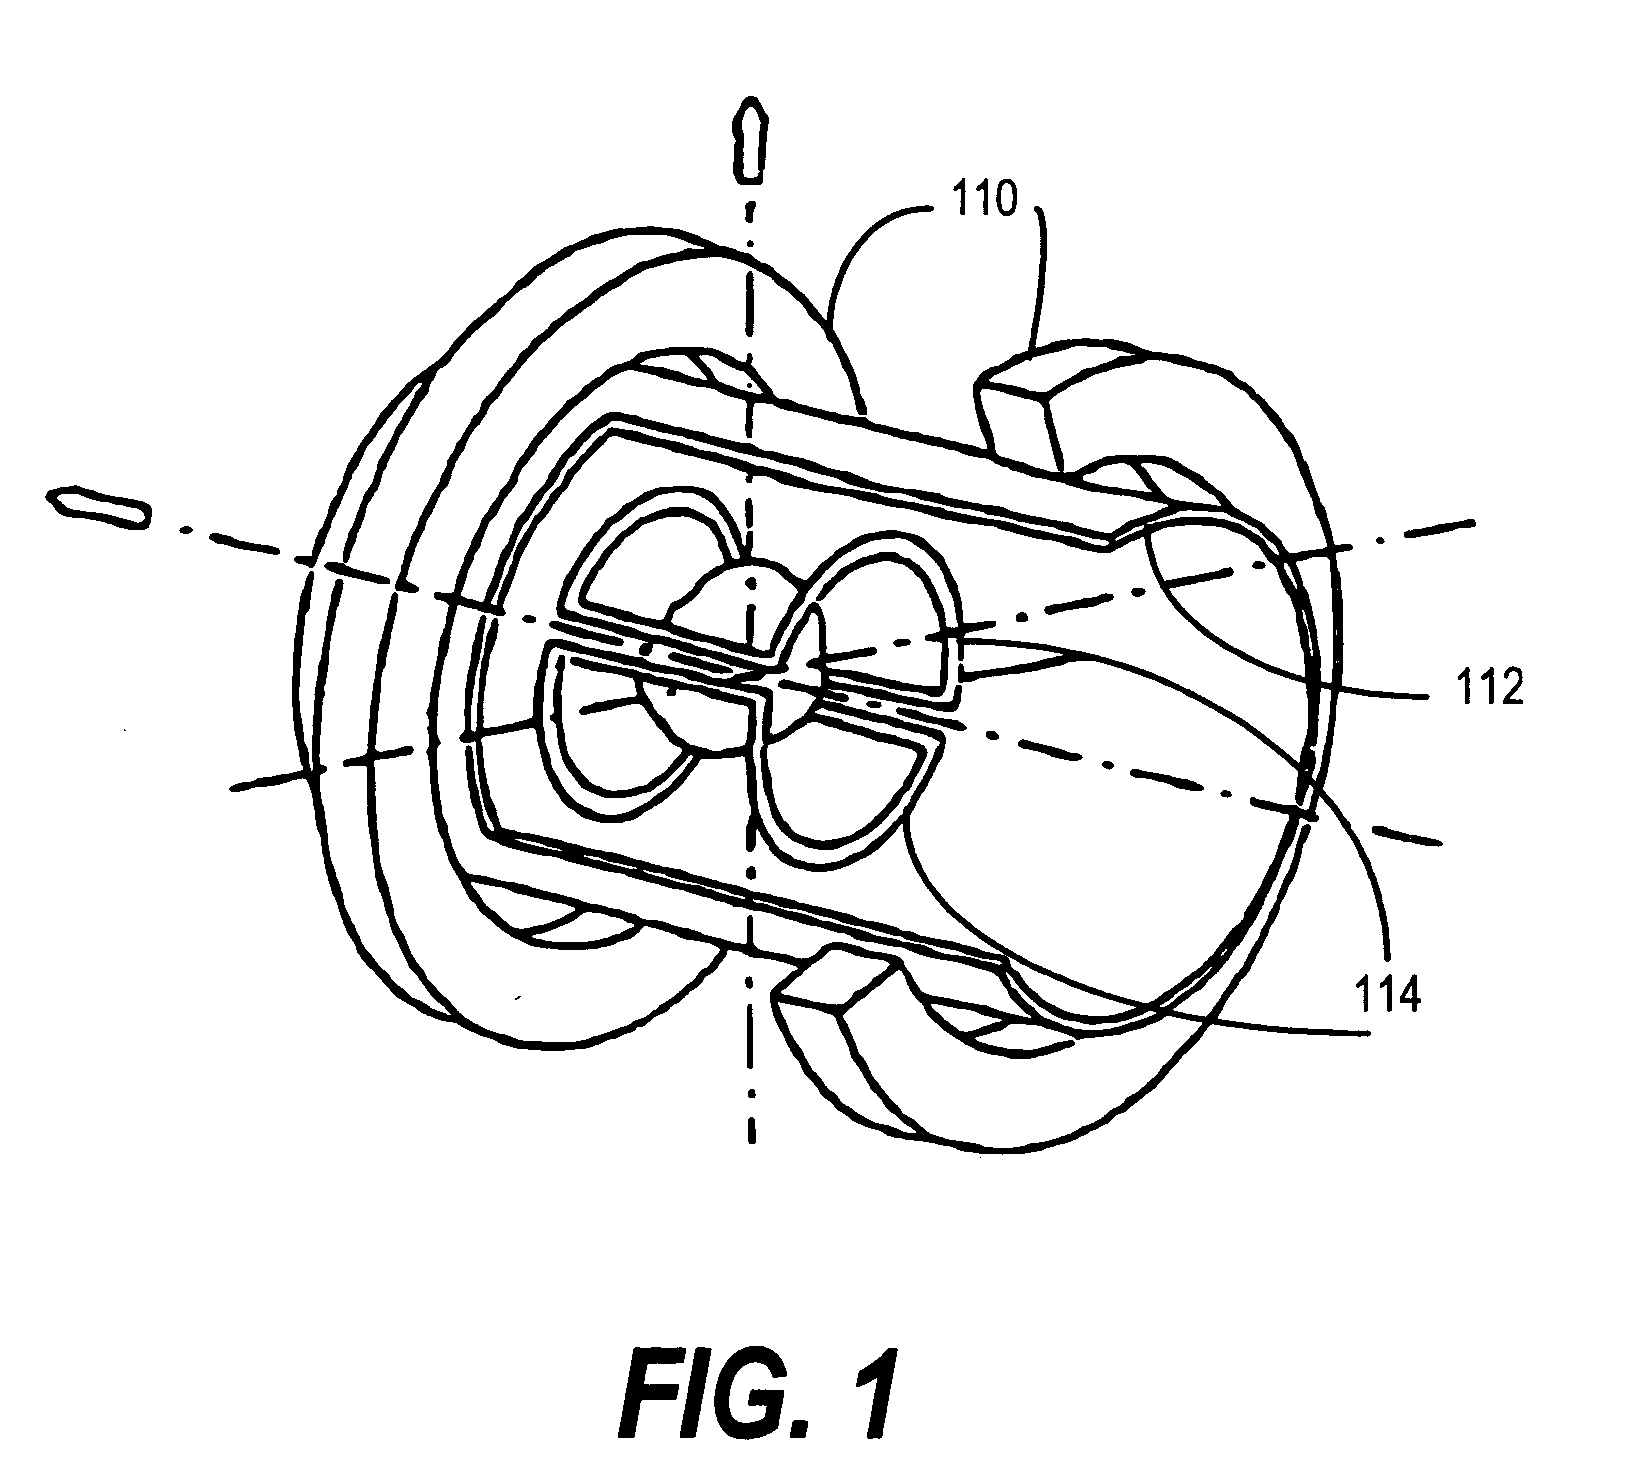 System and method for creating robust training data from MRI images